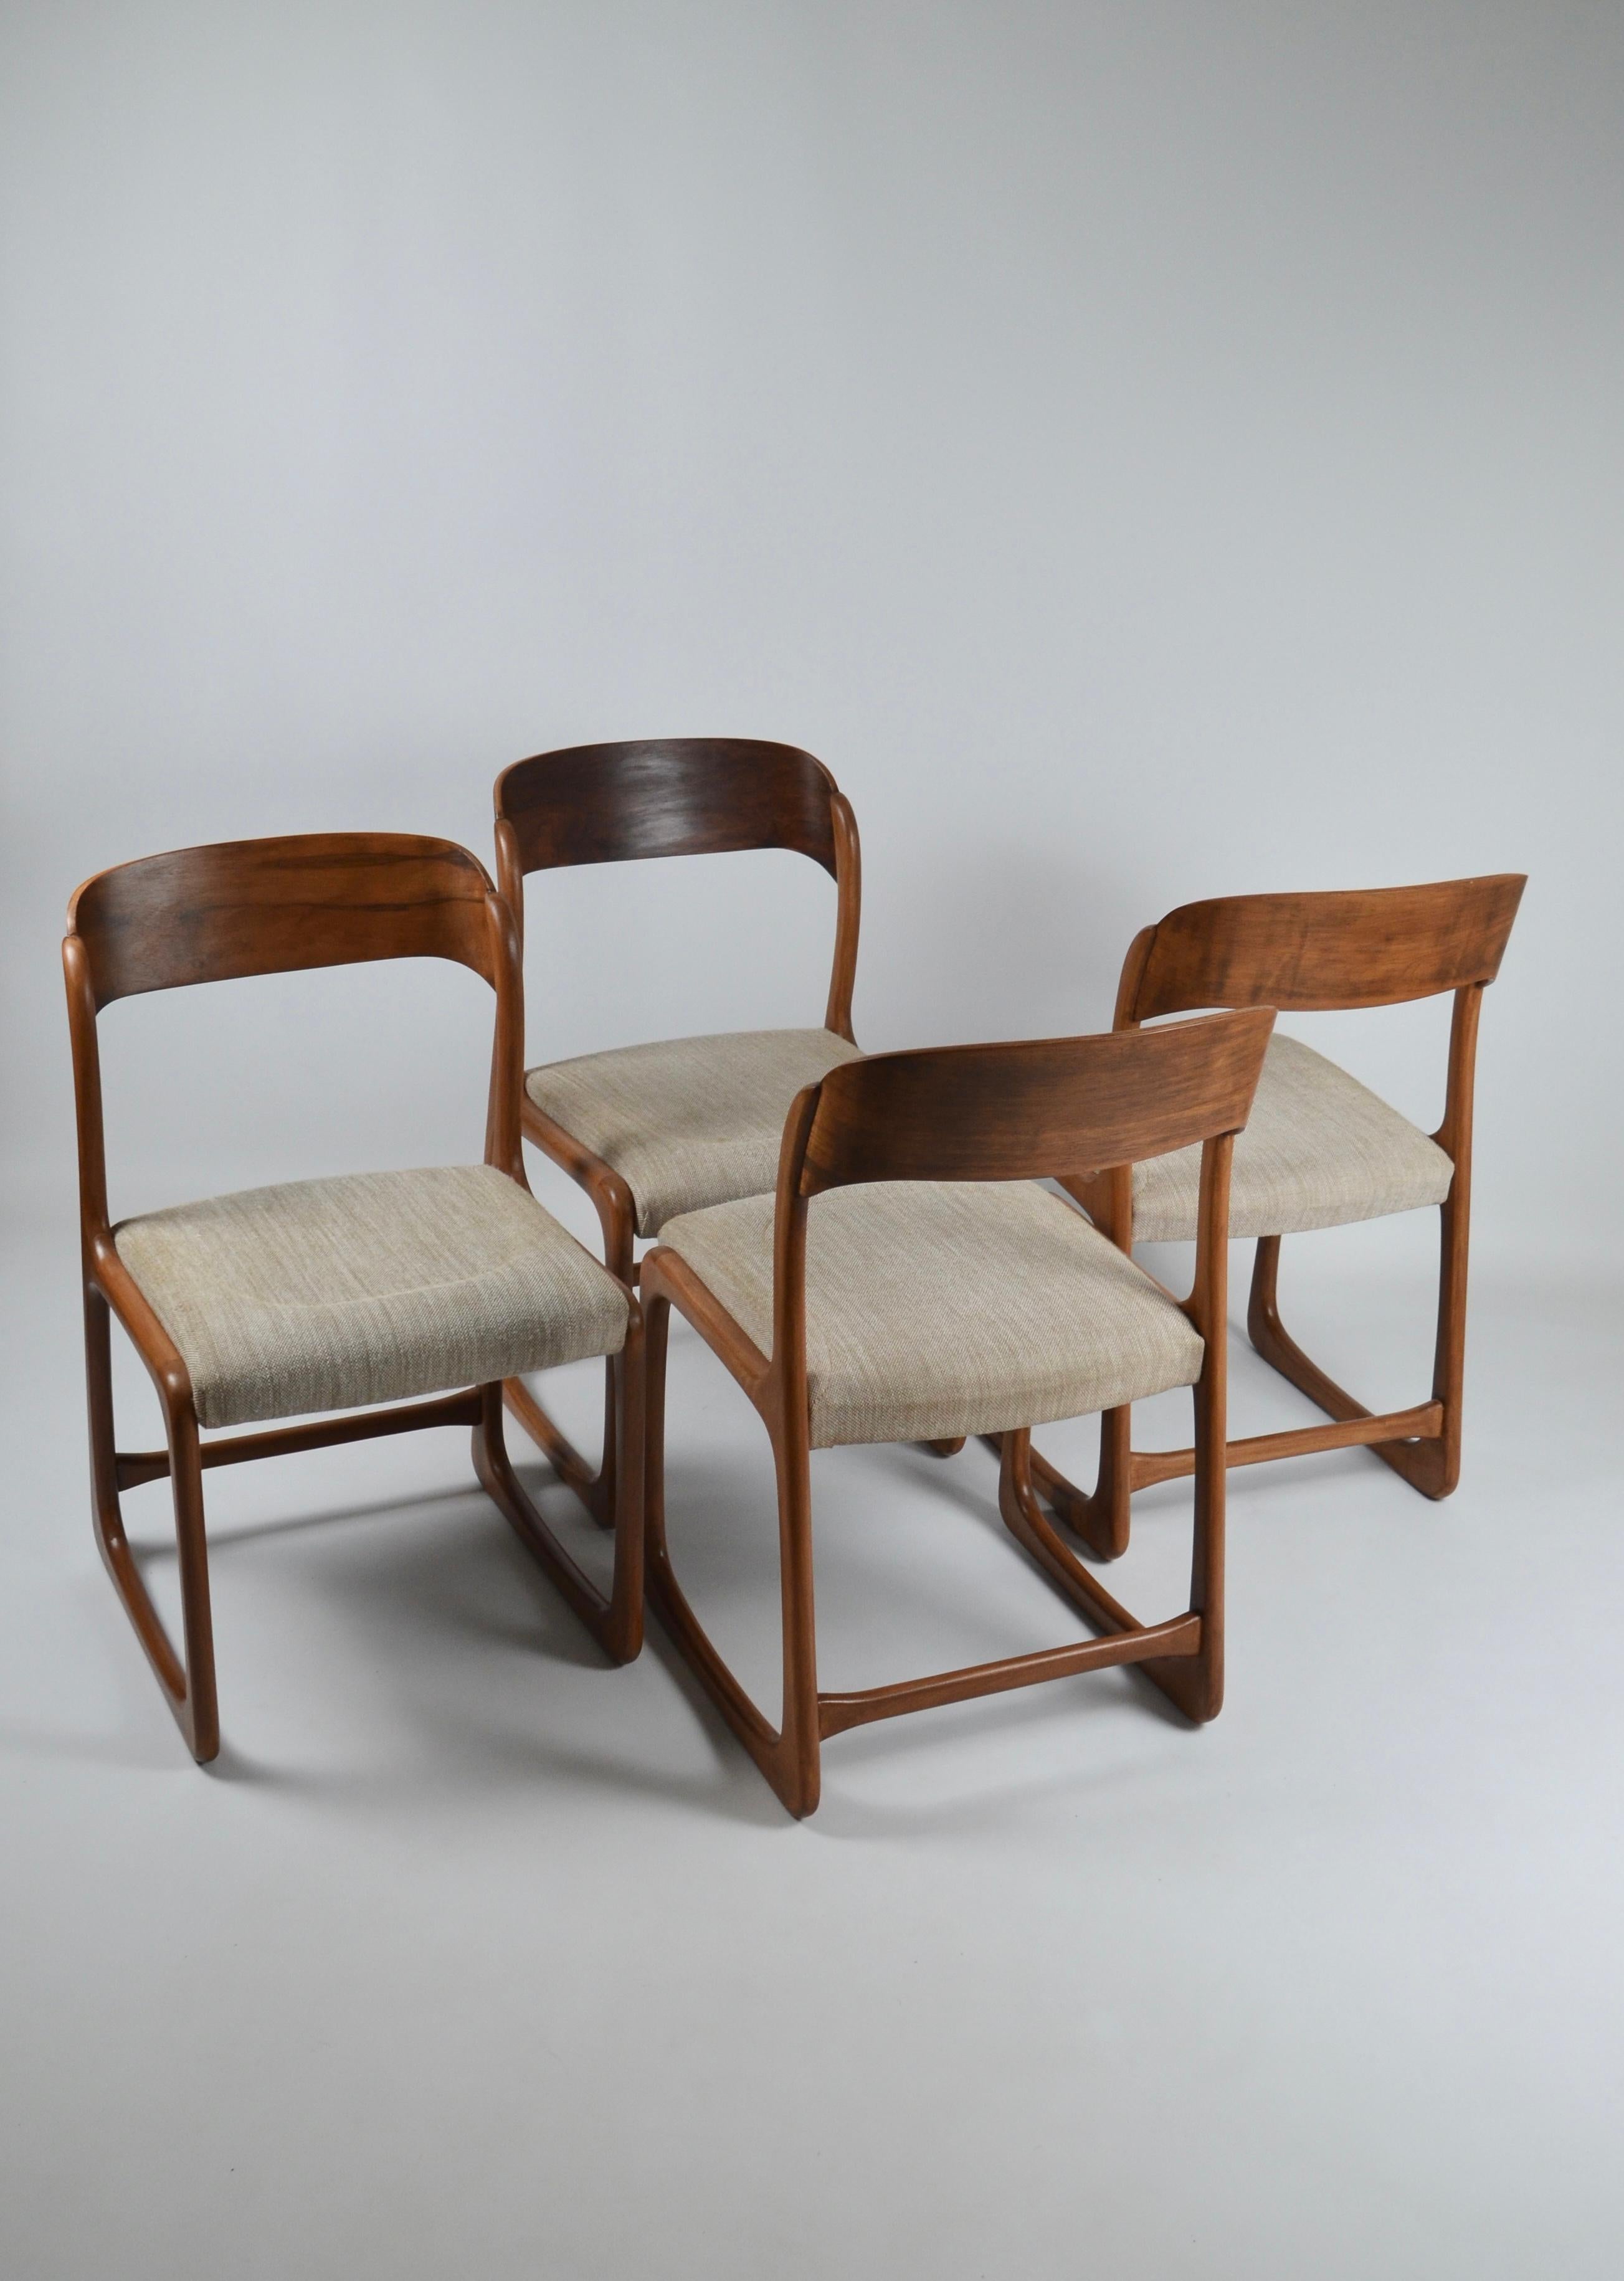 Vintage French Traineau or Sleigh Dining Chairs, Baumann, France, 60s For Sale 3